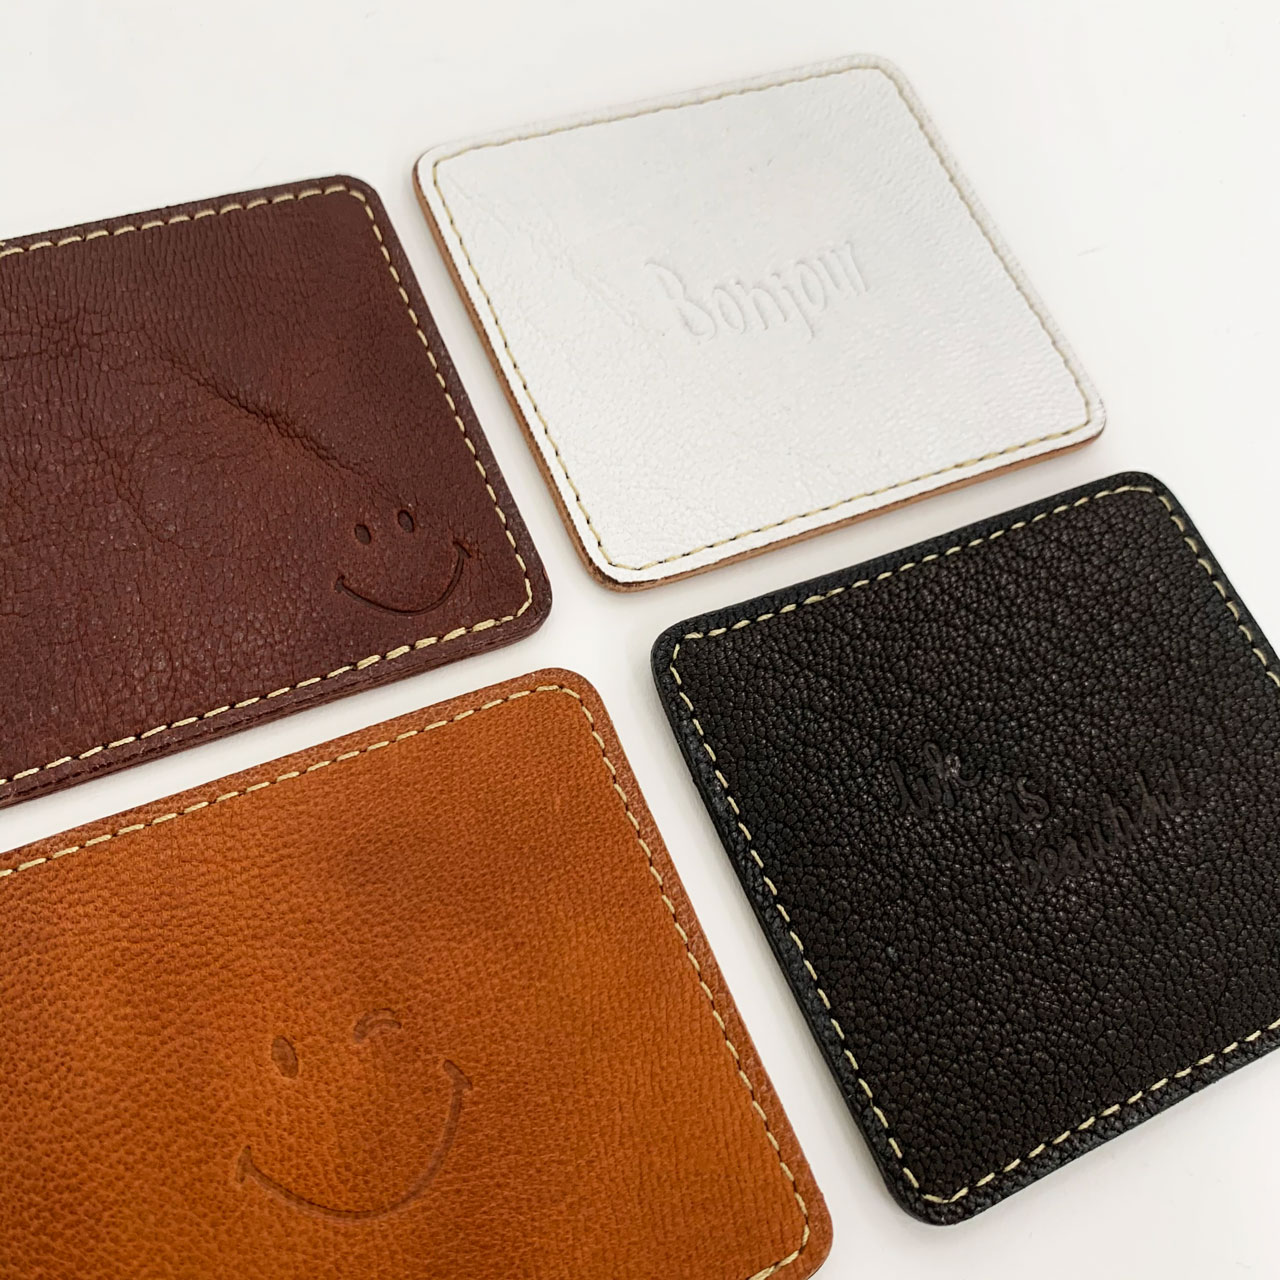 Leather goods collection 